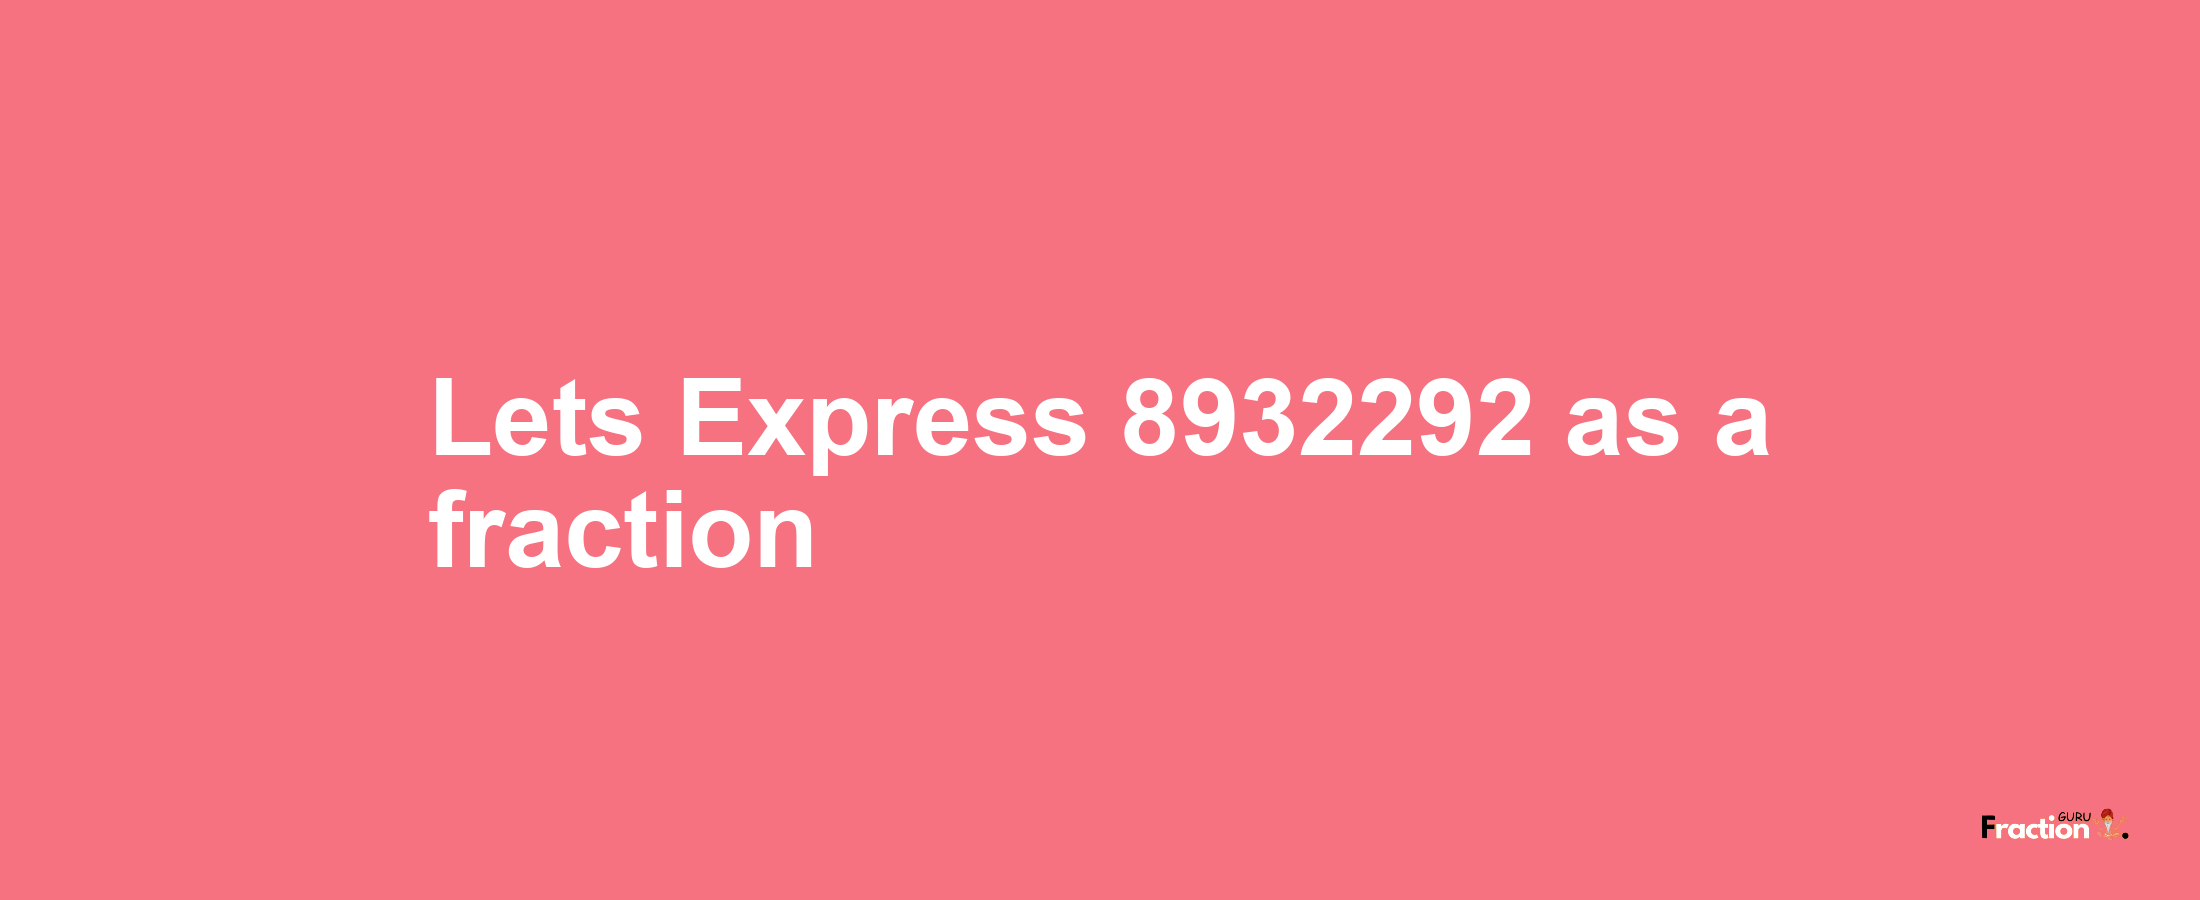 Lets Express 8932292 as afraction